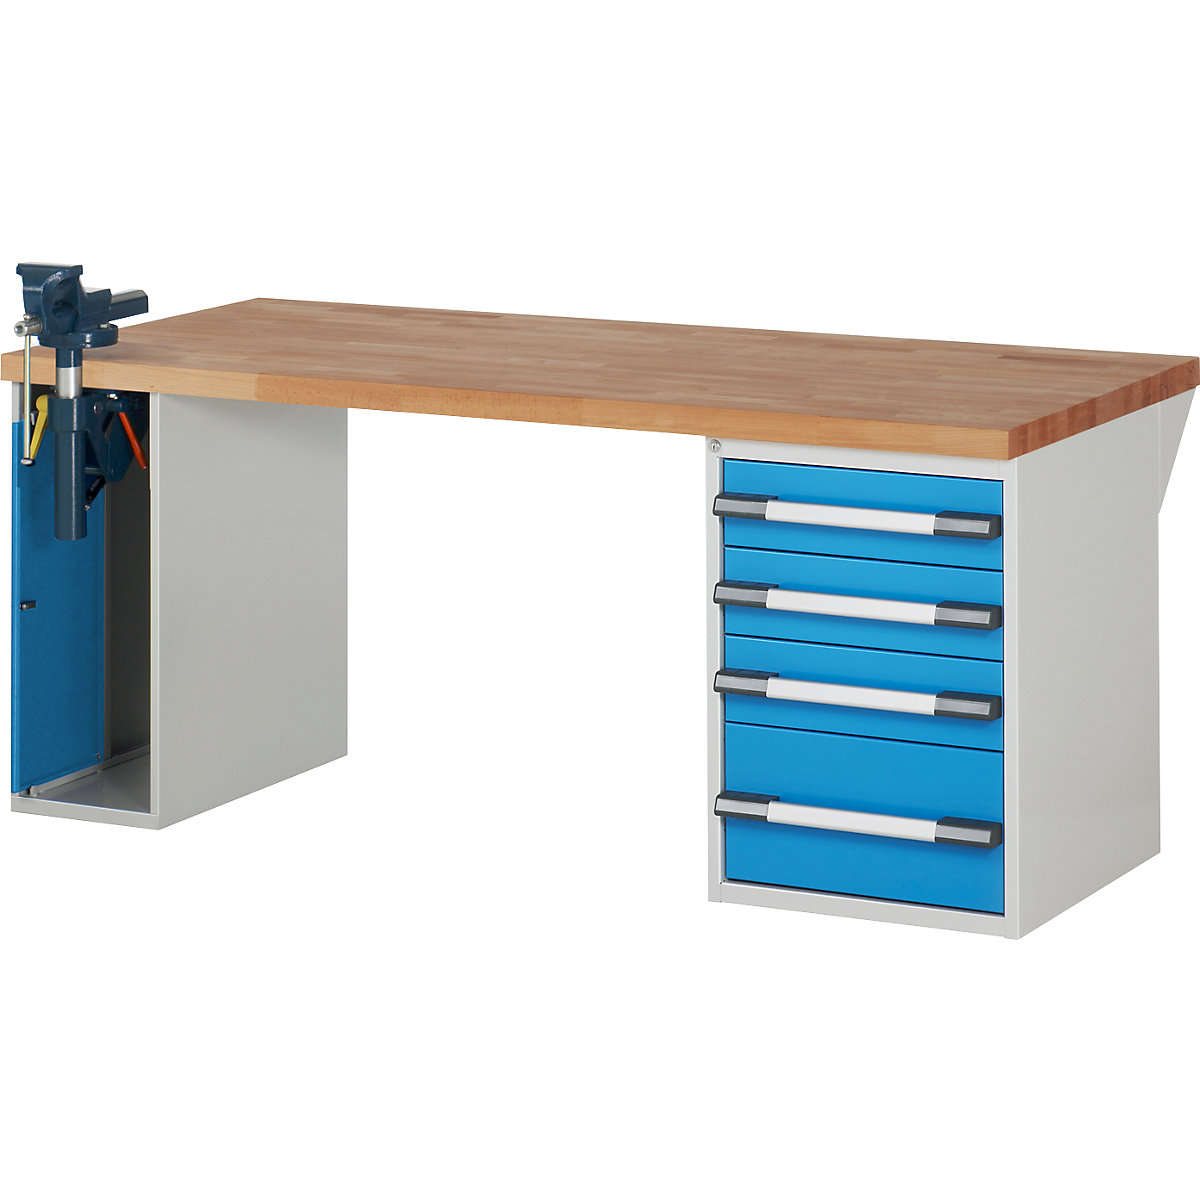 Workbench, Series 7 modular system – eurokraft pro, 1 cupboard, 1 fixed pedestal with 4 drawers, WxD 2000 x 900 mm-3